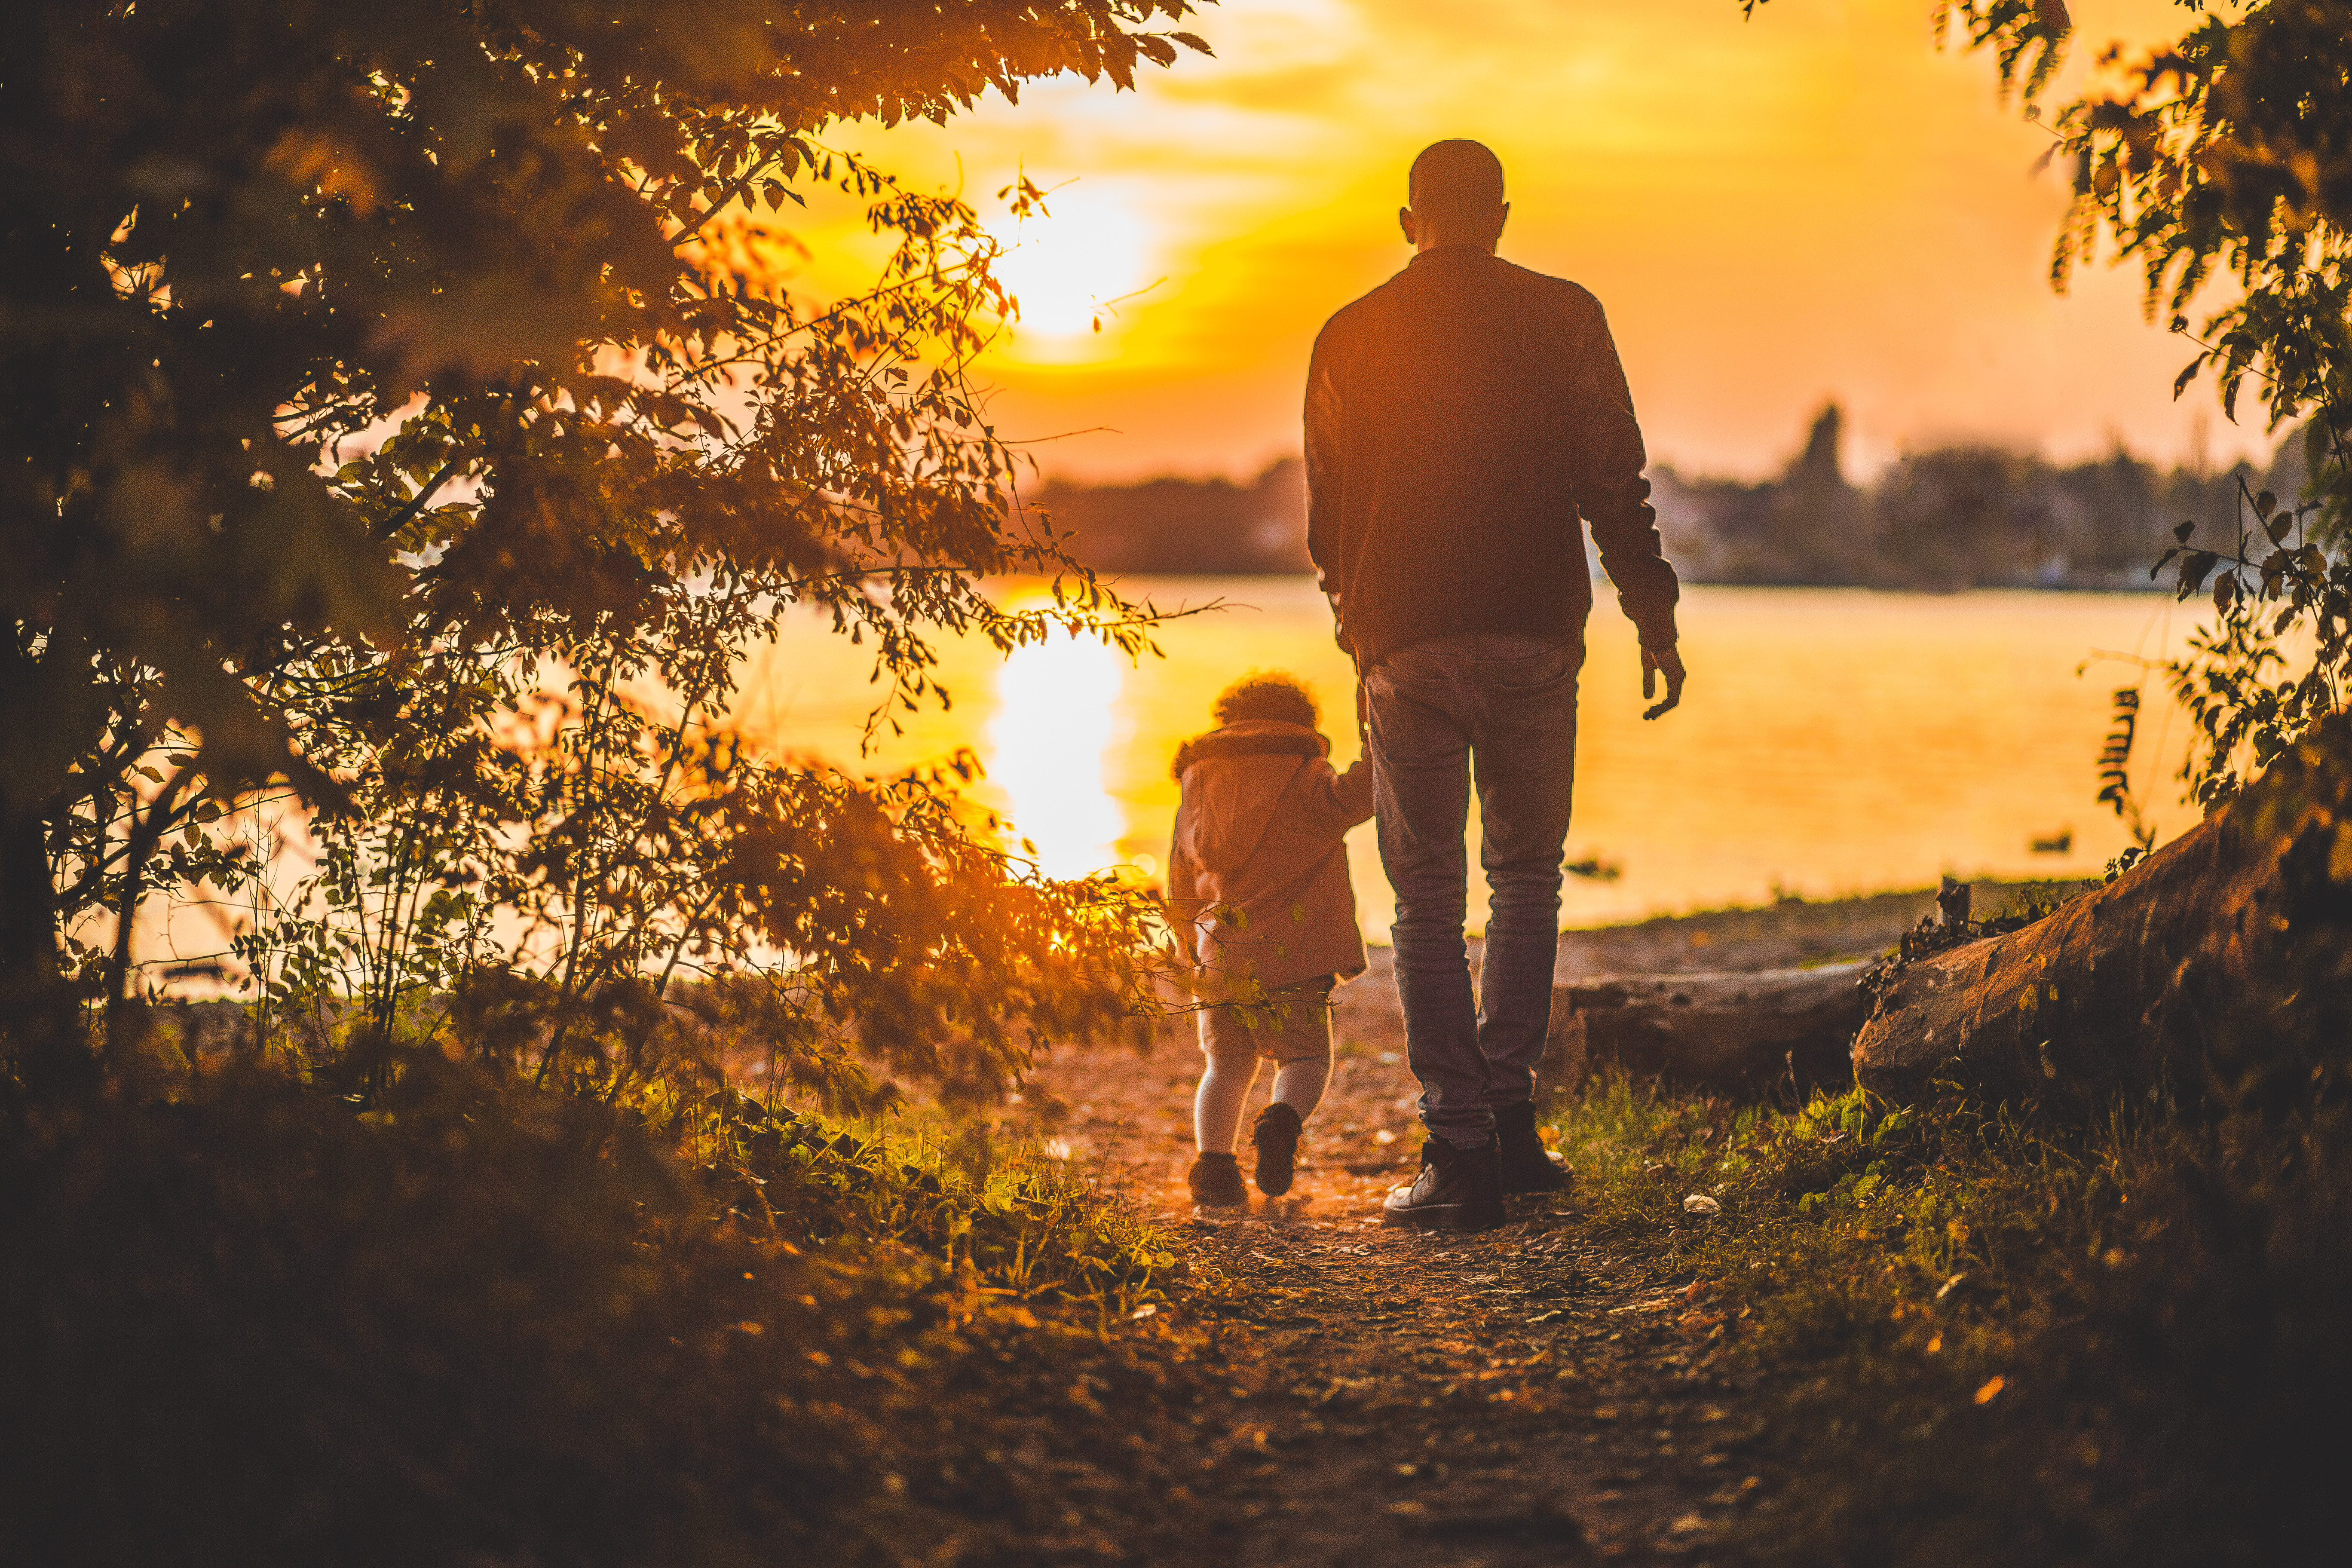 Father and Child walking at sunset image - Free stock photo - Public ...